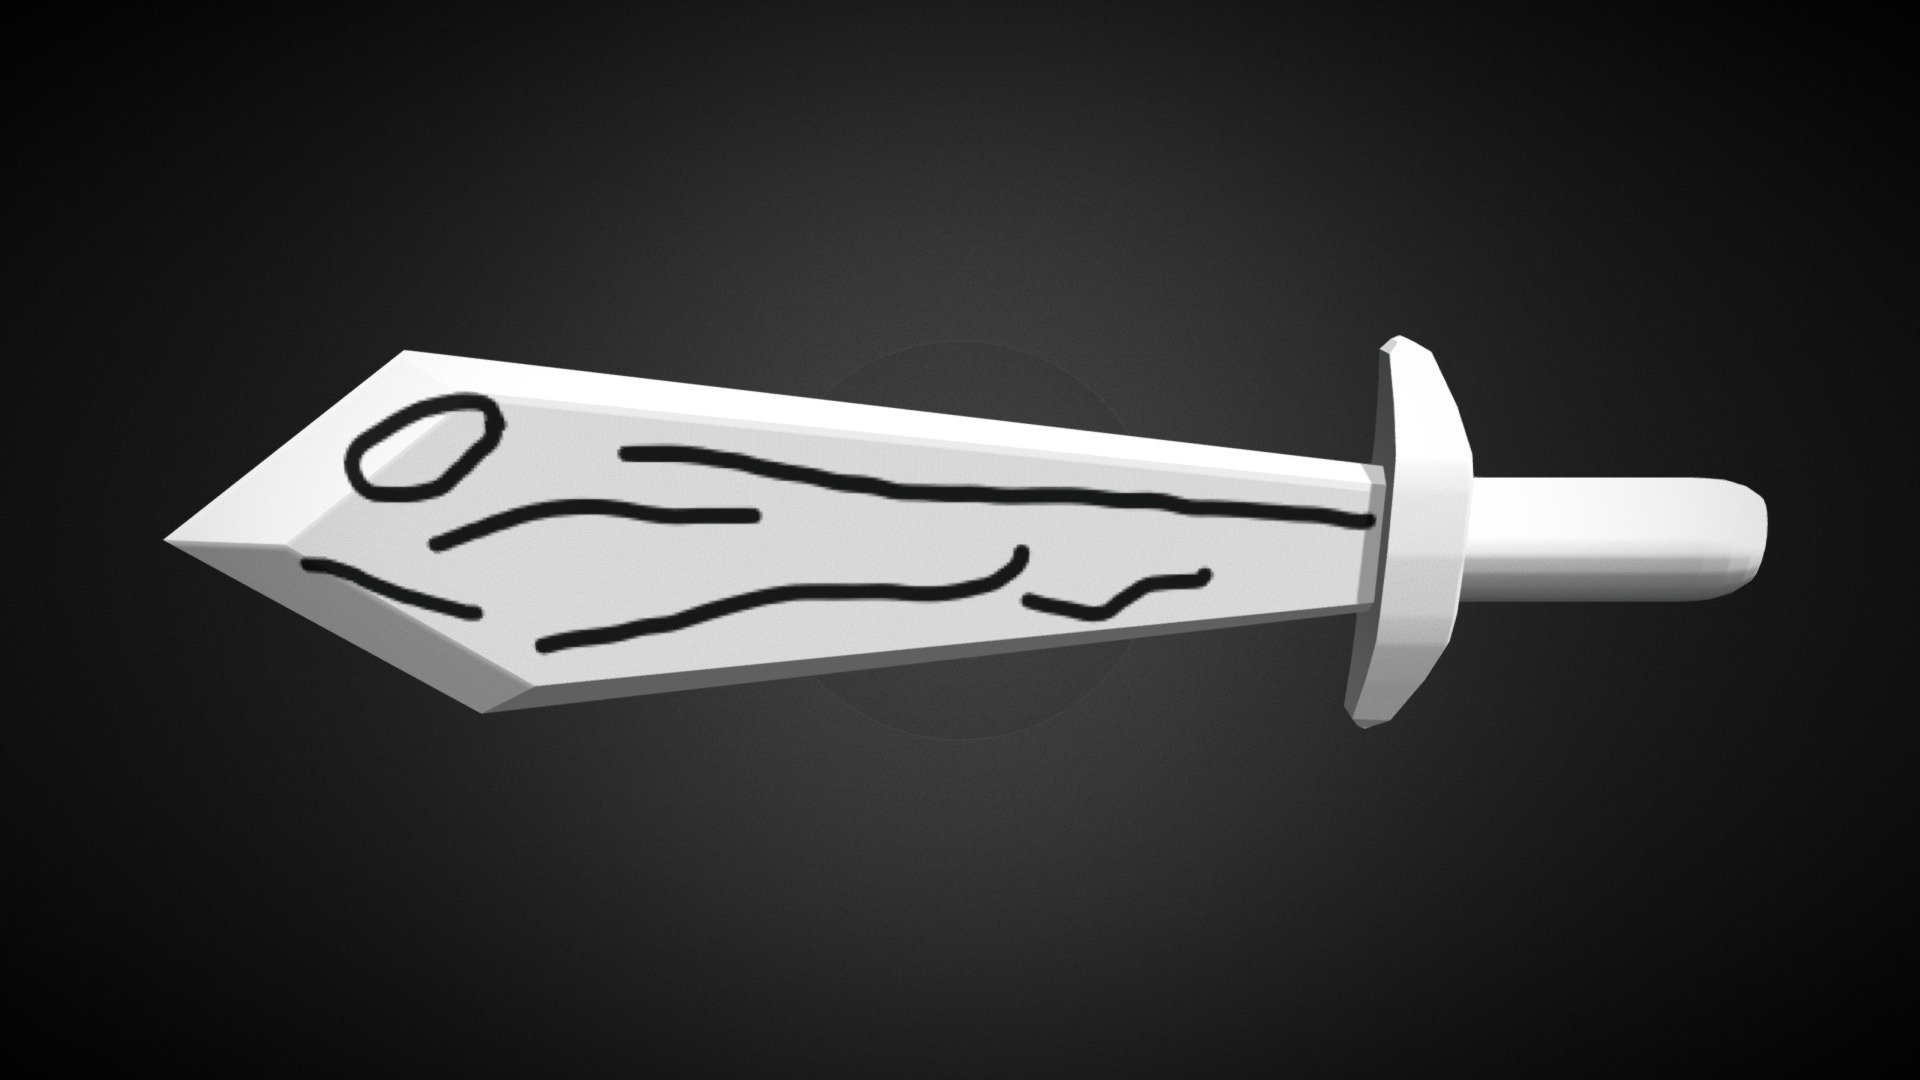 A cartoony placeholder sword.
Use for whatever you want &lt;3 - Cartoon Wooden Sword - Download Free 3D model by BlaizeJ 3d model